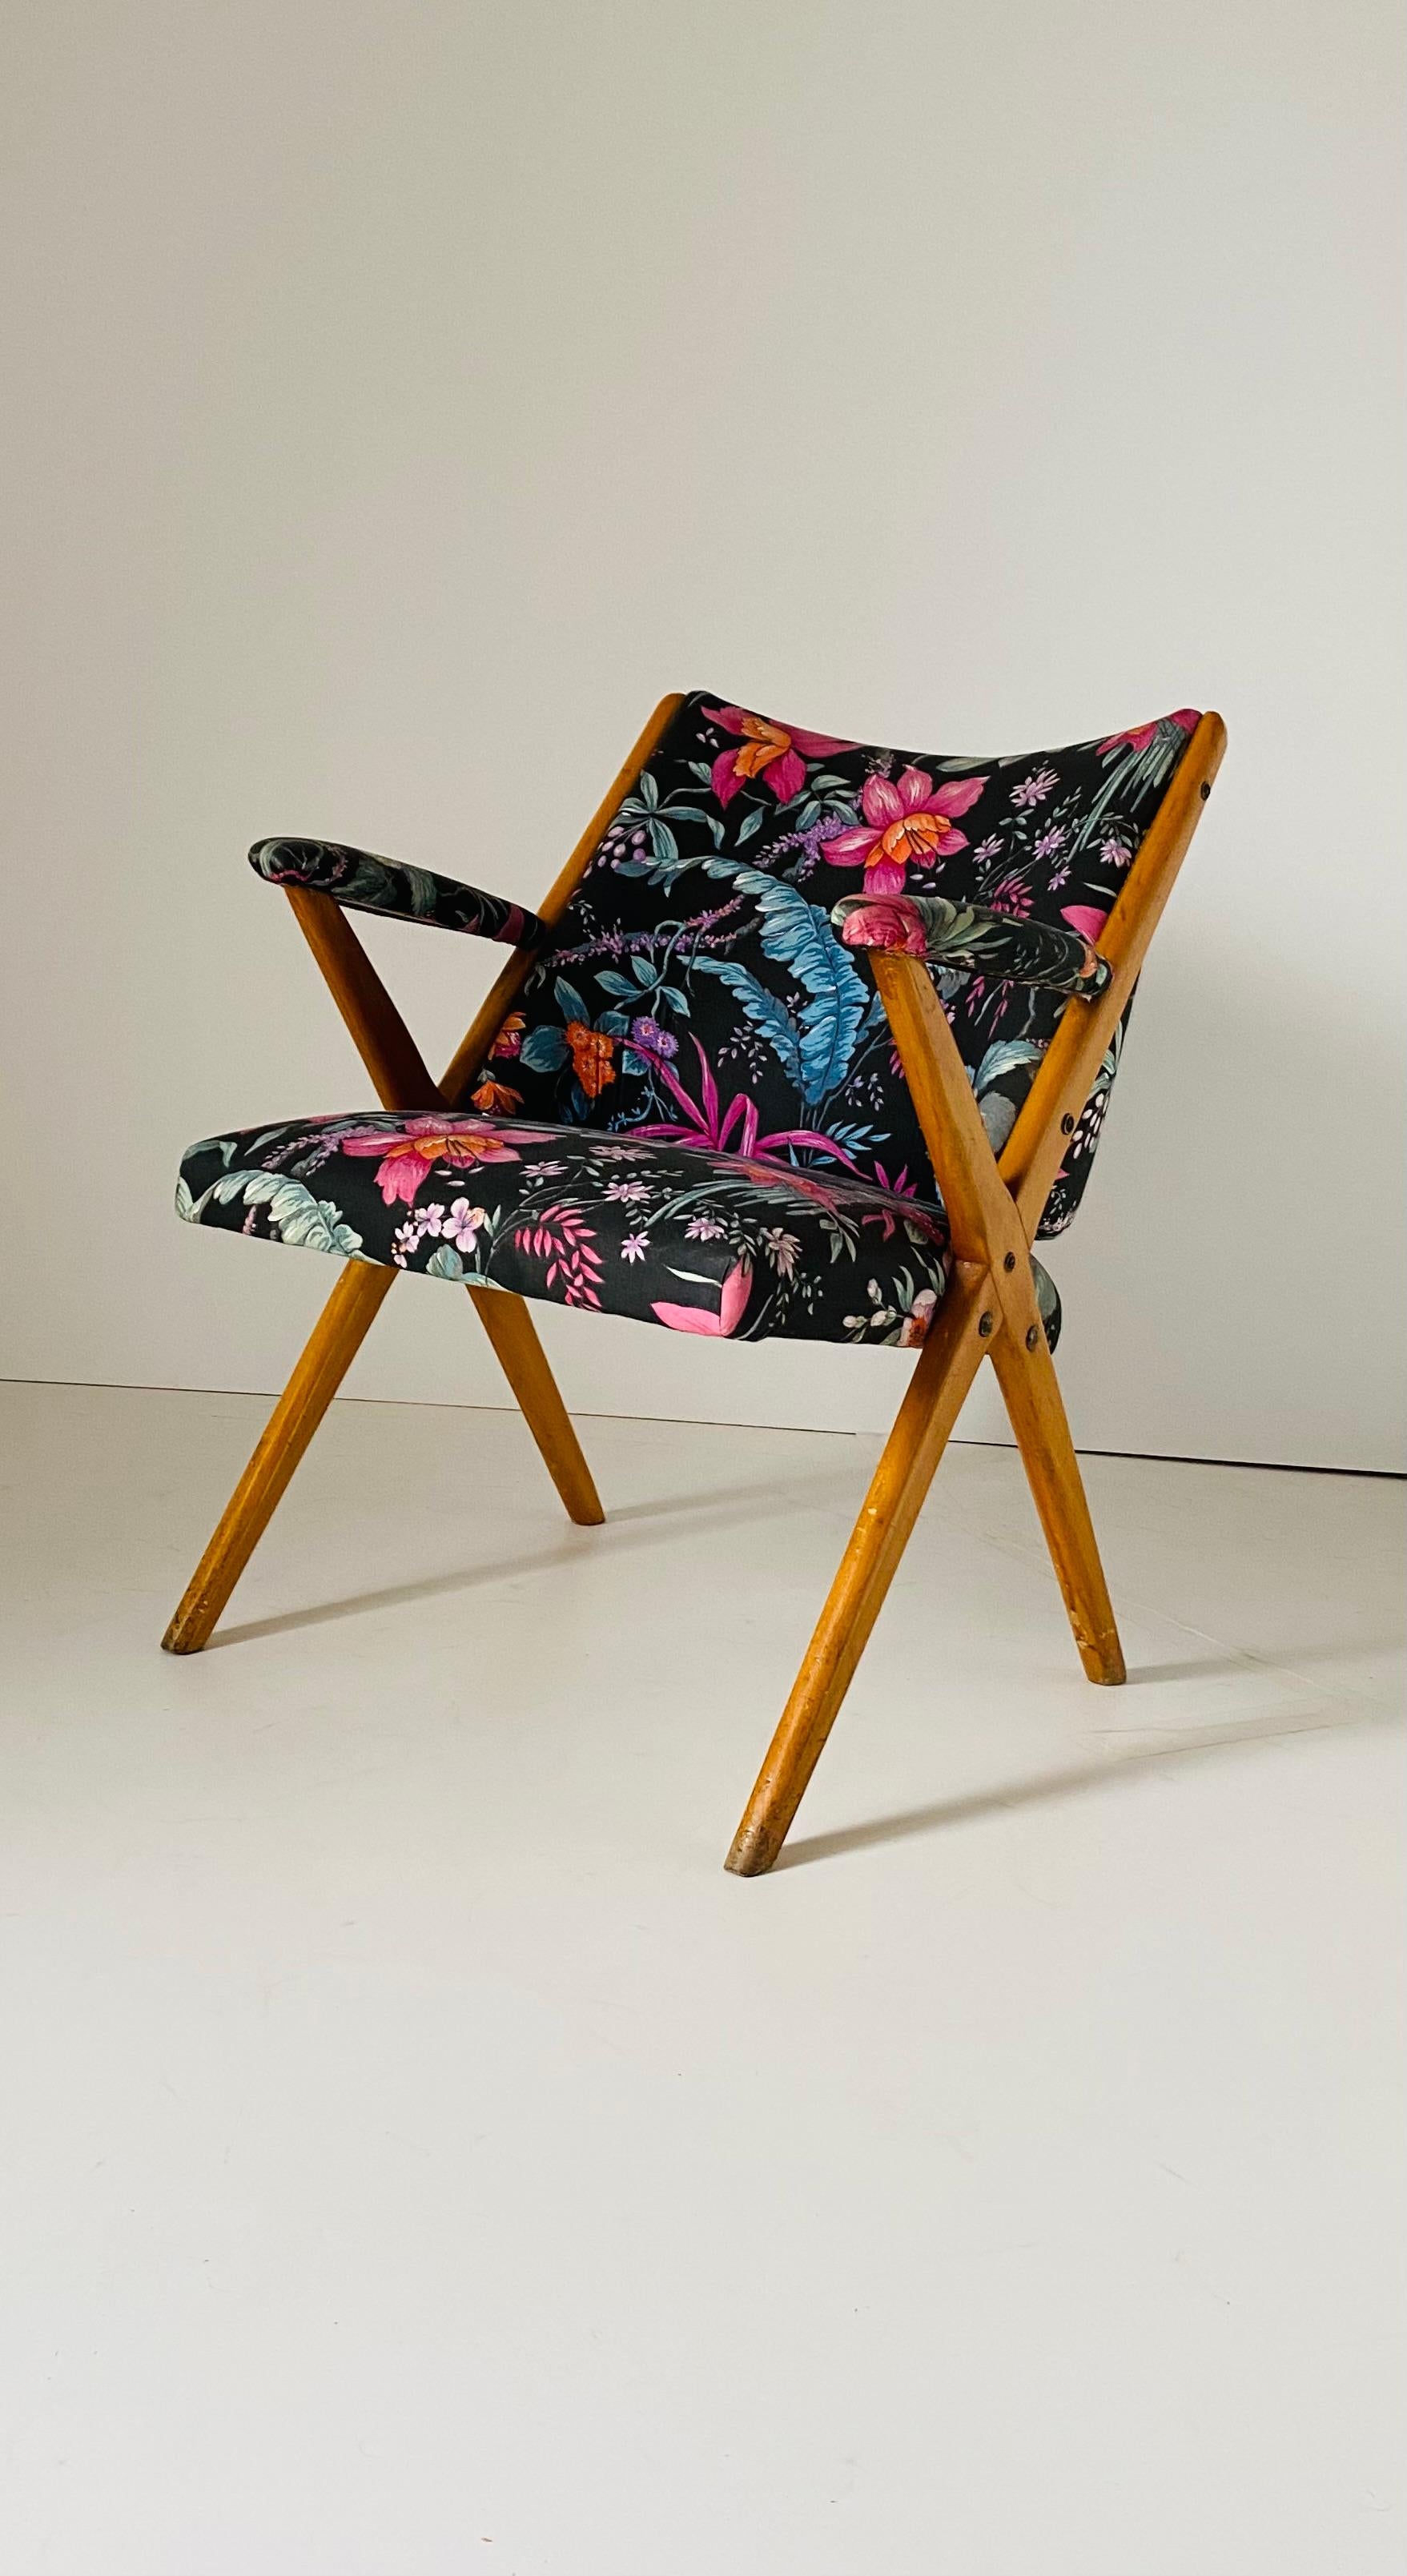 Midcentury Modern Dal Vera Armchair with Flower Pattern, Italy 1960's

A beautiful 1960s vintrage wood and fabric lounge chair. Italian midcentury chair manufactured by Dal Vera. Solid wood beech structure and cozy flower pattern cover. Filling in